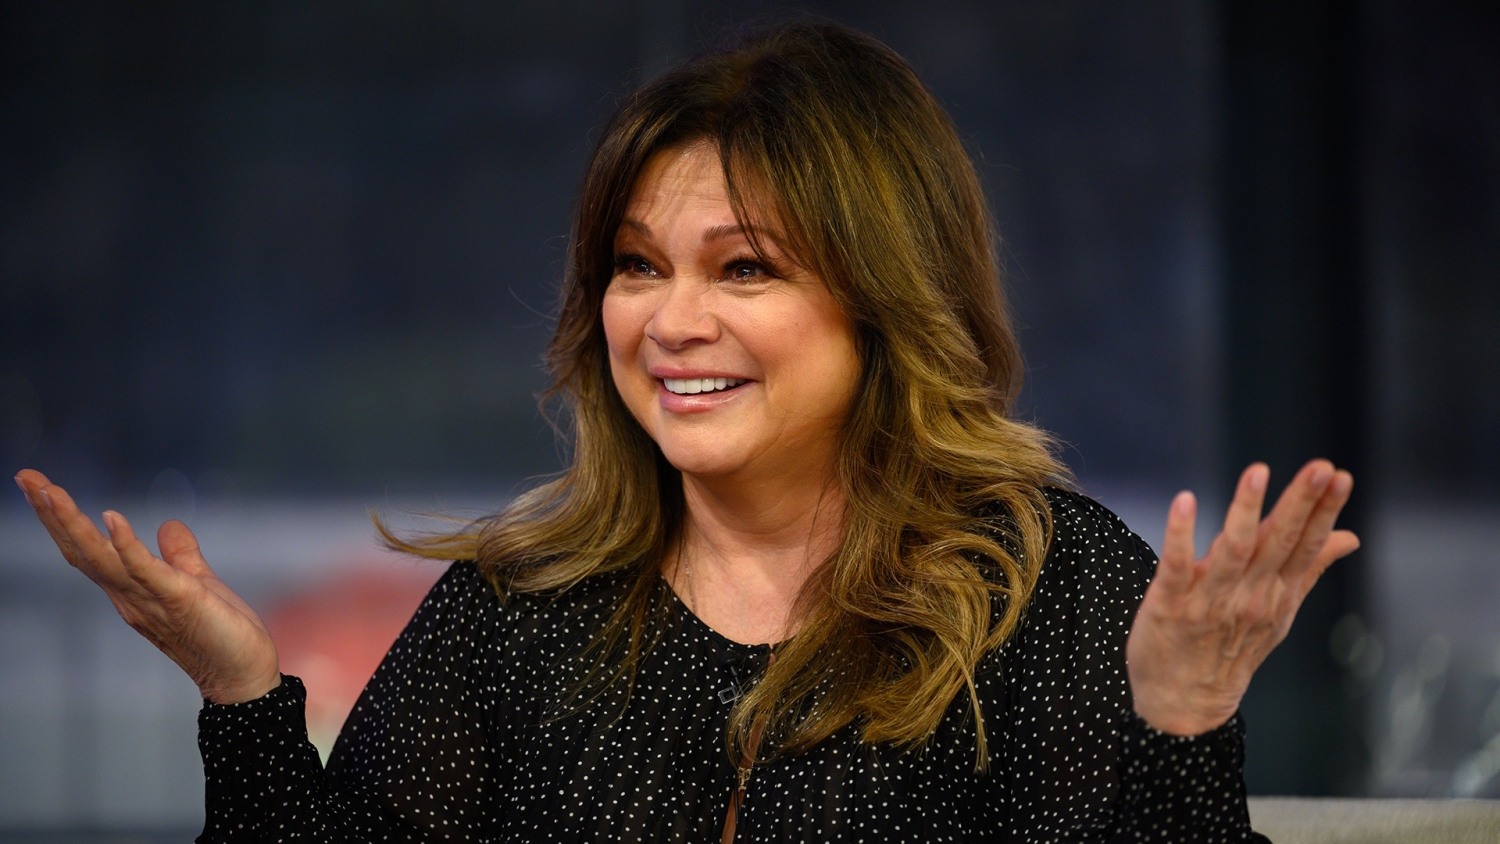 Valerie Bertinelli Children: How Many Kids Does She Have? Husbands, and Family 